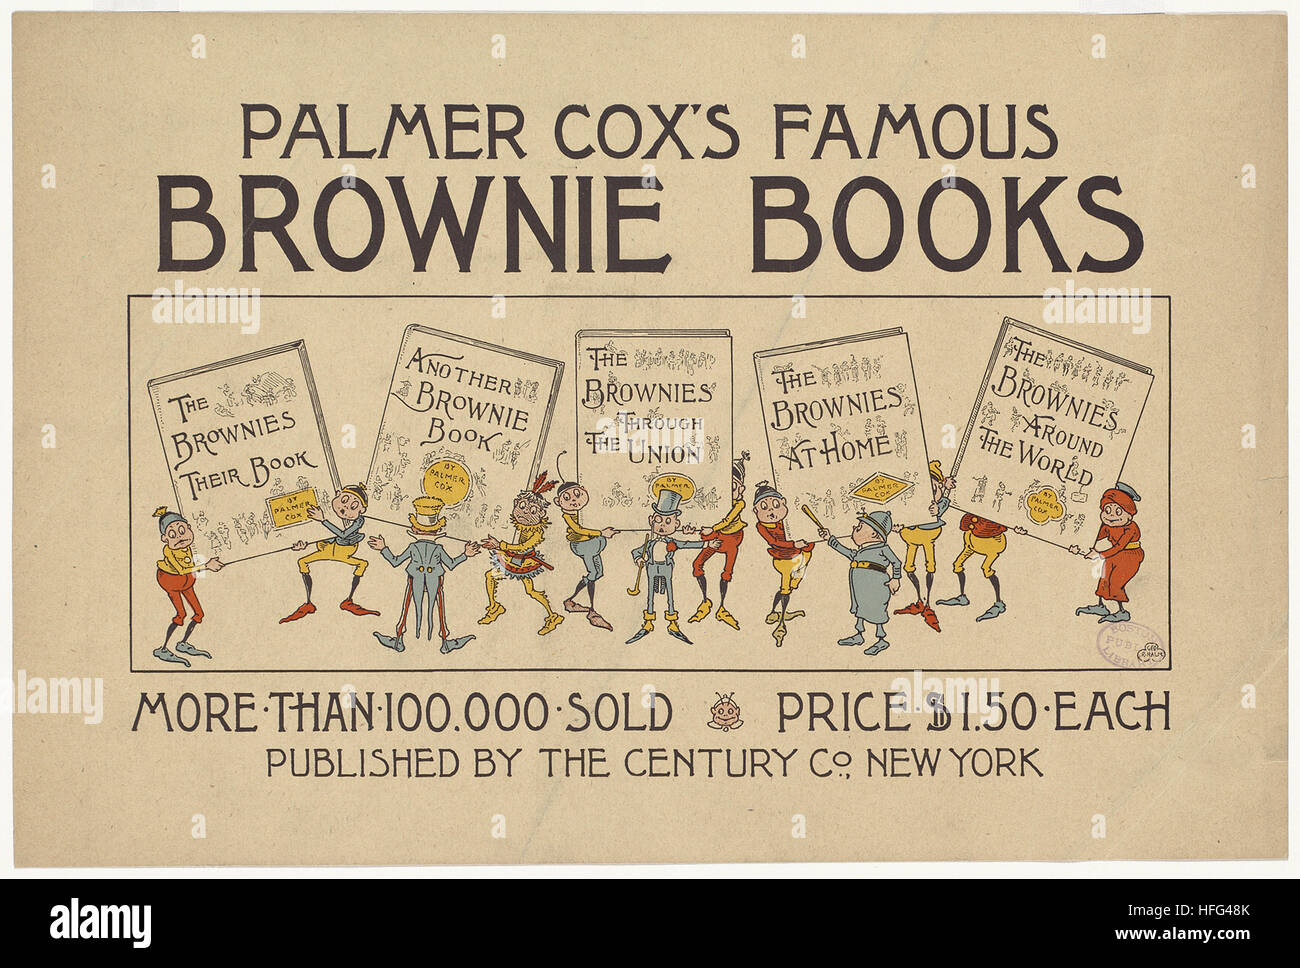 Palmer Cox's famous brownie books Stock Photo